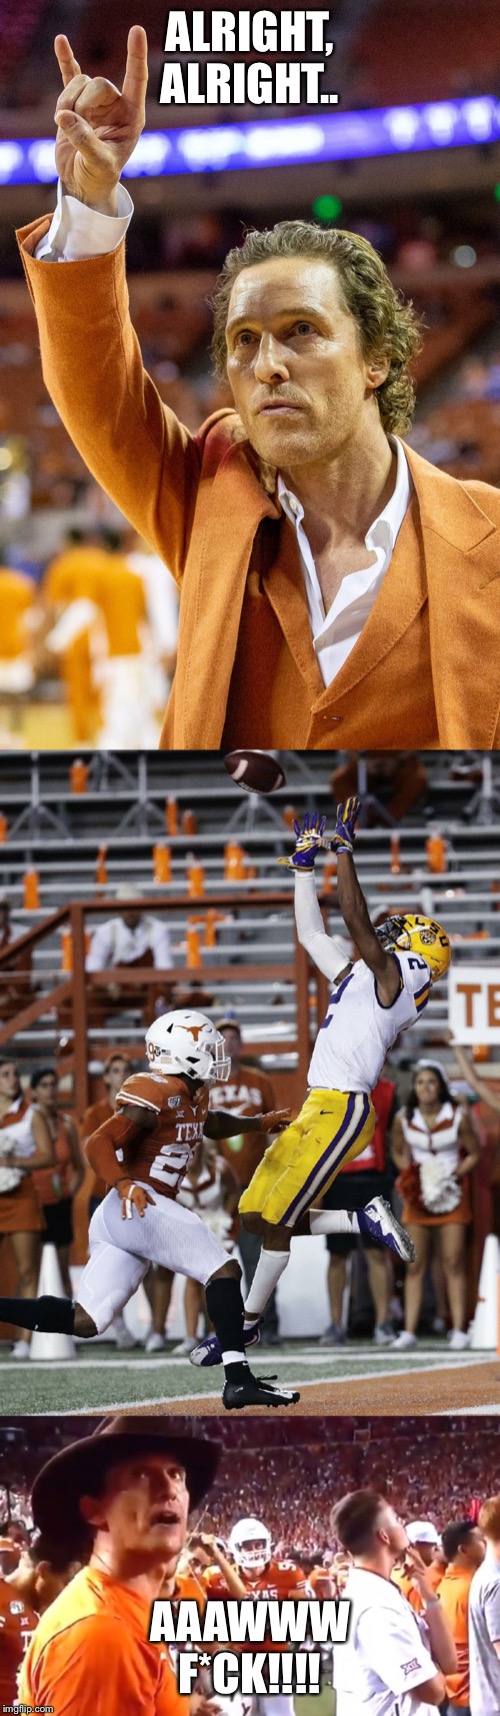 ALRIGHT, ALRIGHT.. AAAWWW F*CK!!!! | image tagged in texas,matthew mcconaughey,lsu,football,college football | made w/ Imgflip meme maker